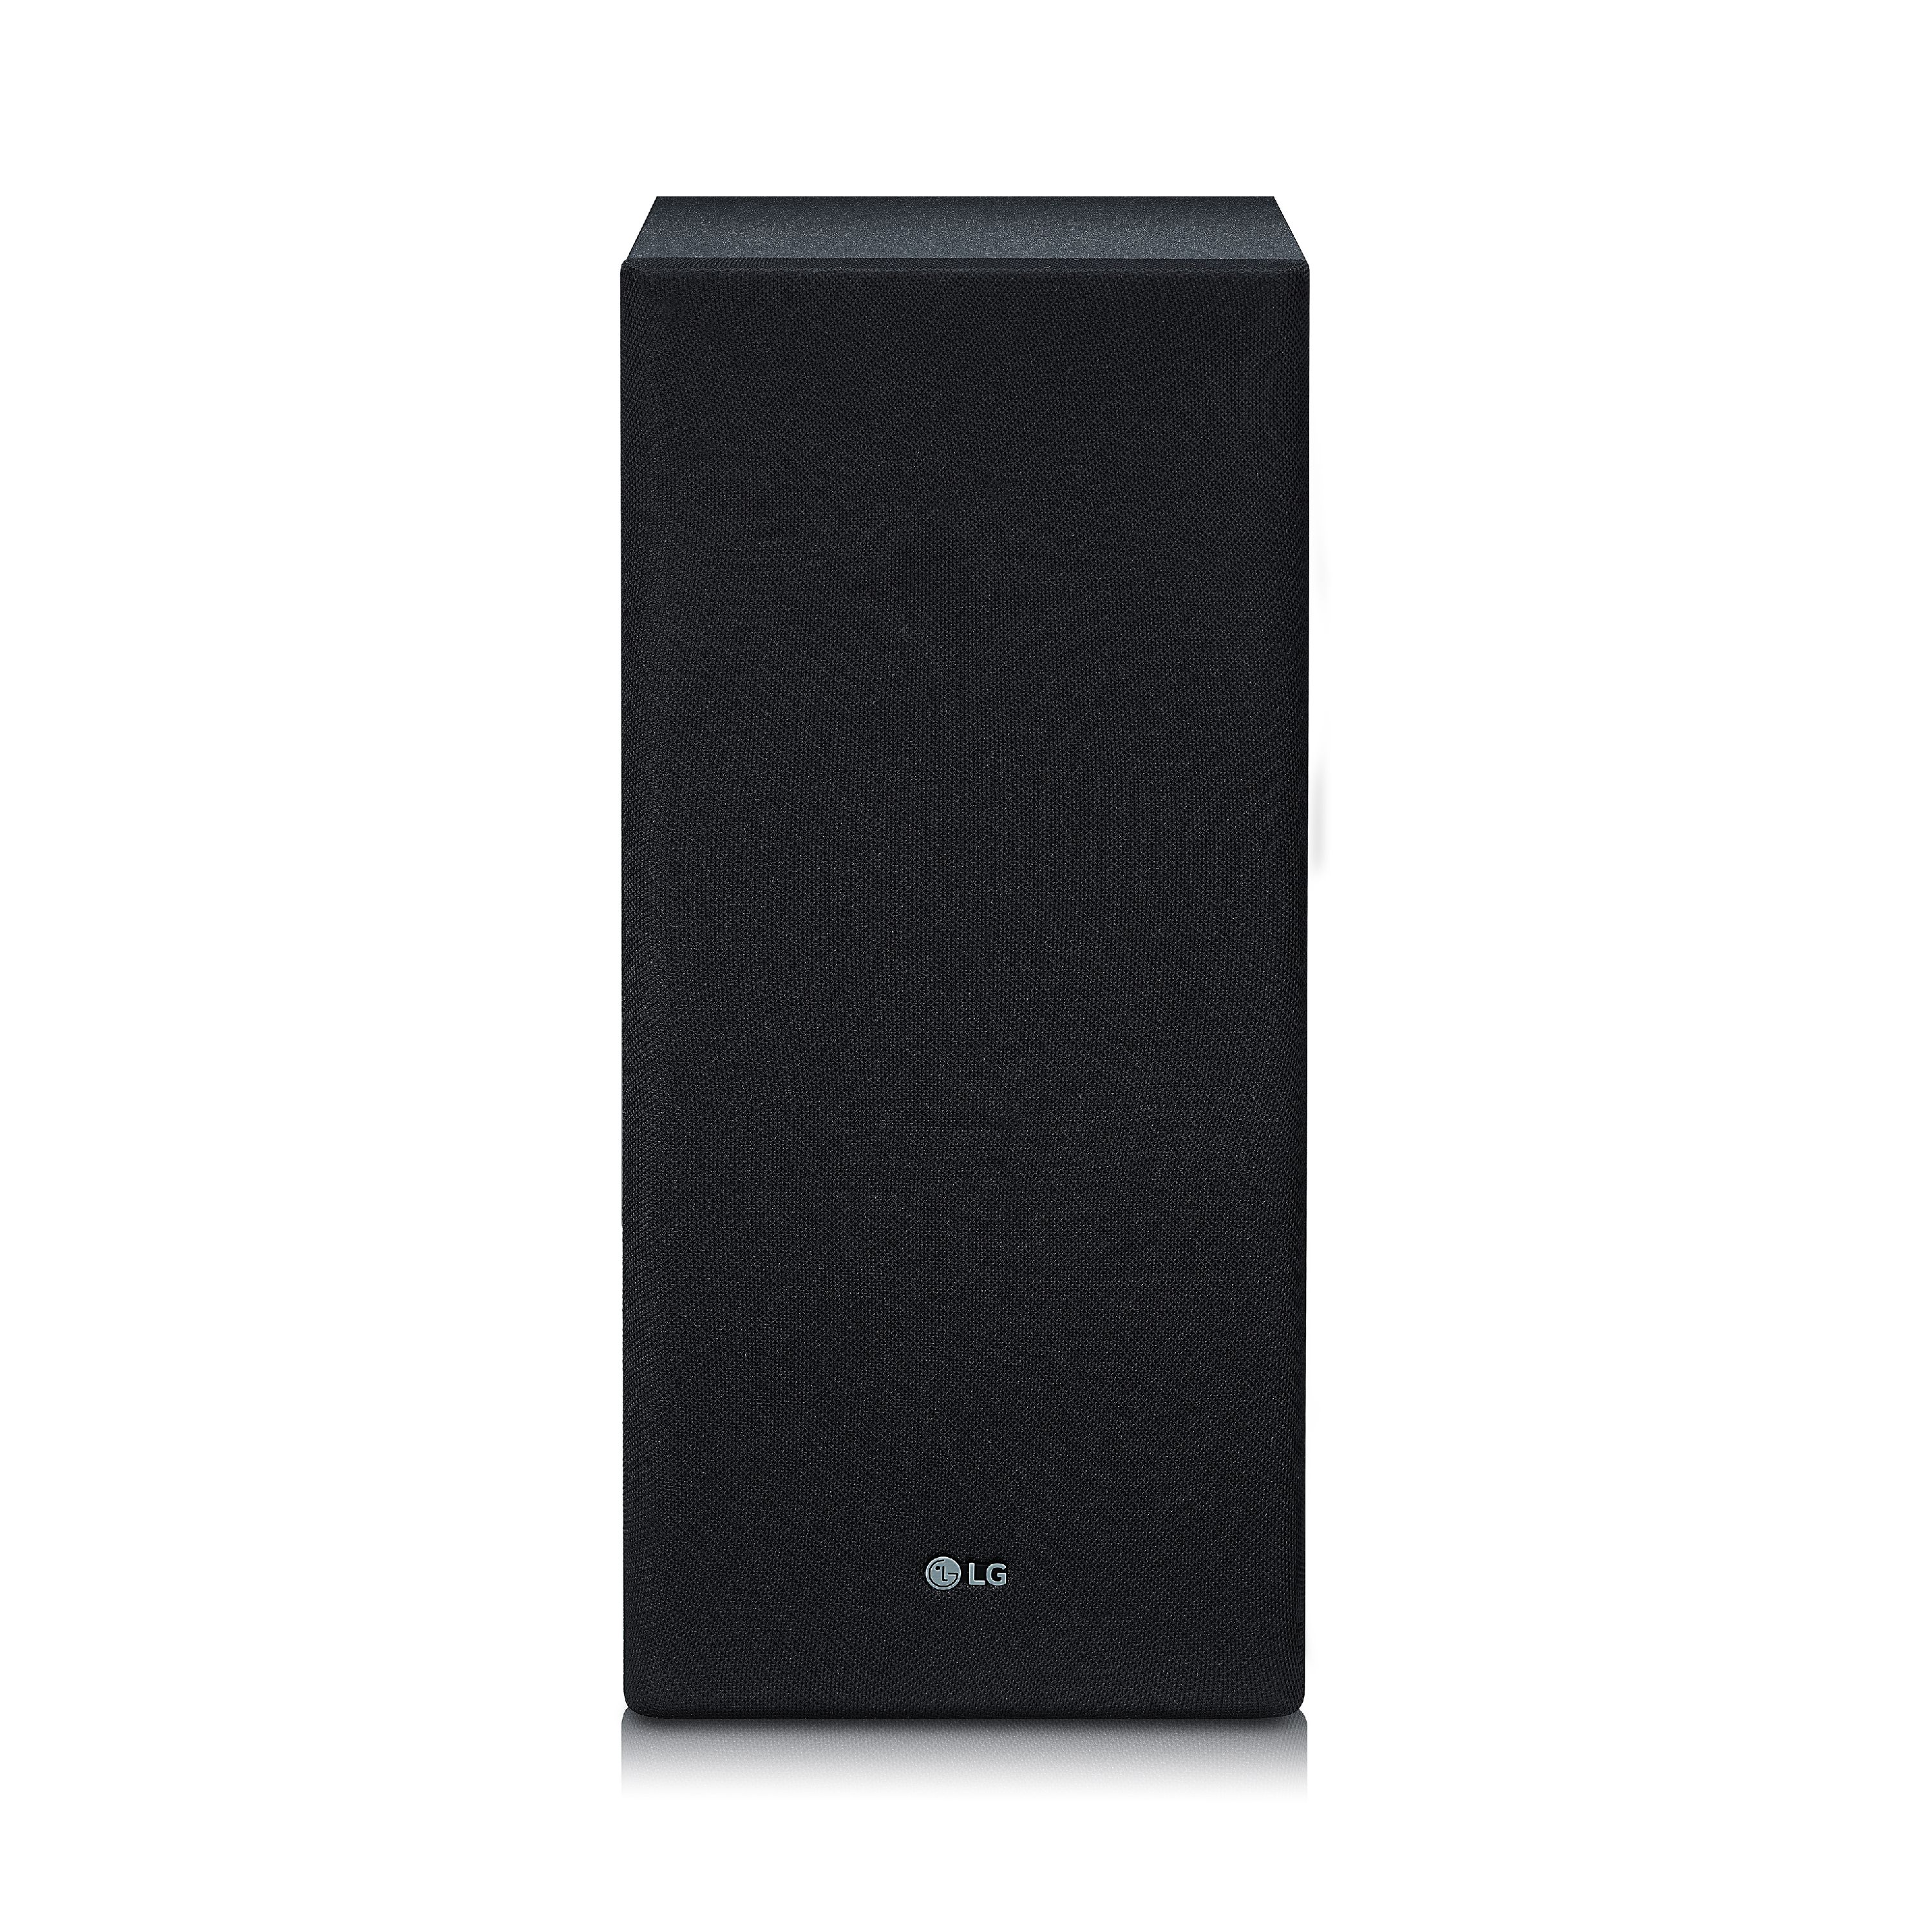 LG 3.1.2 Channel 440W High Res Audio Soundbar with Dolby Atmos® and Google Assistant Built-In - SL8YG - image 11 of 11